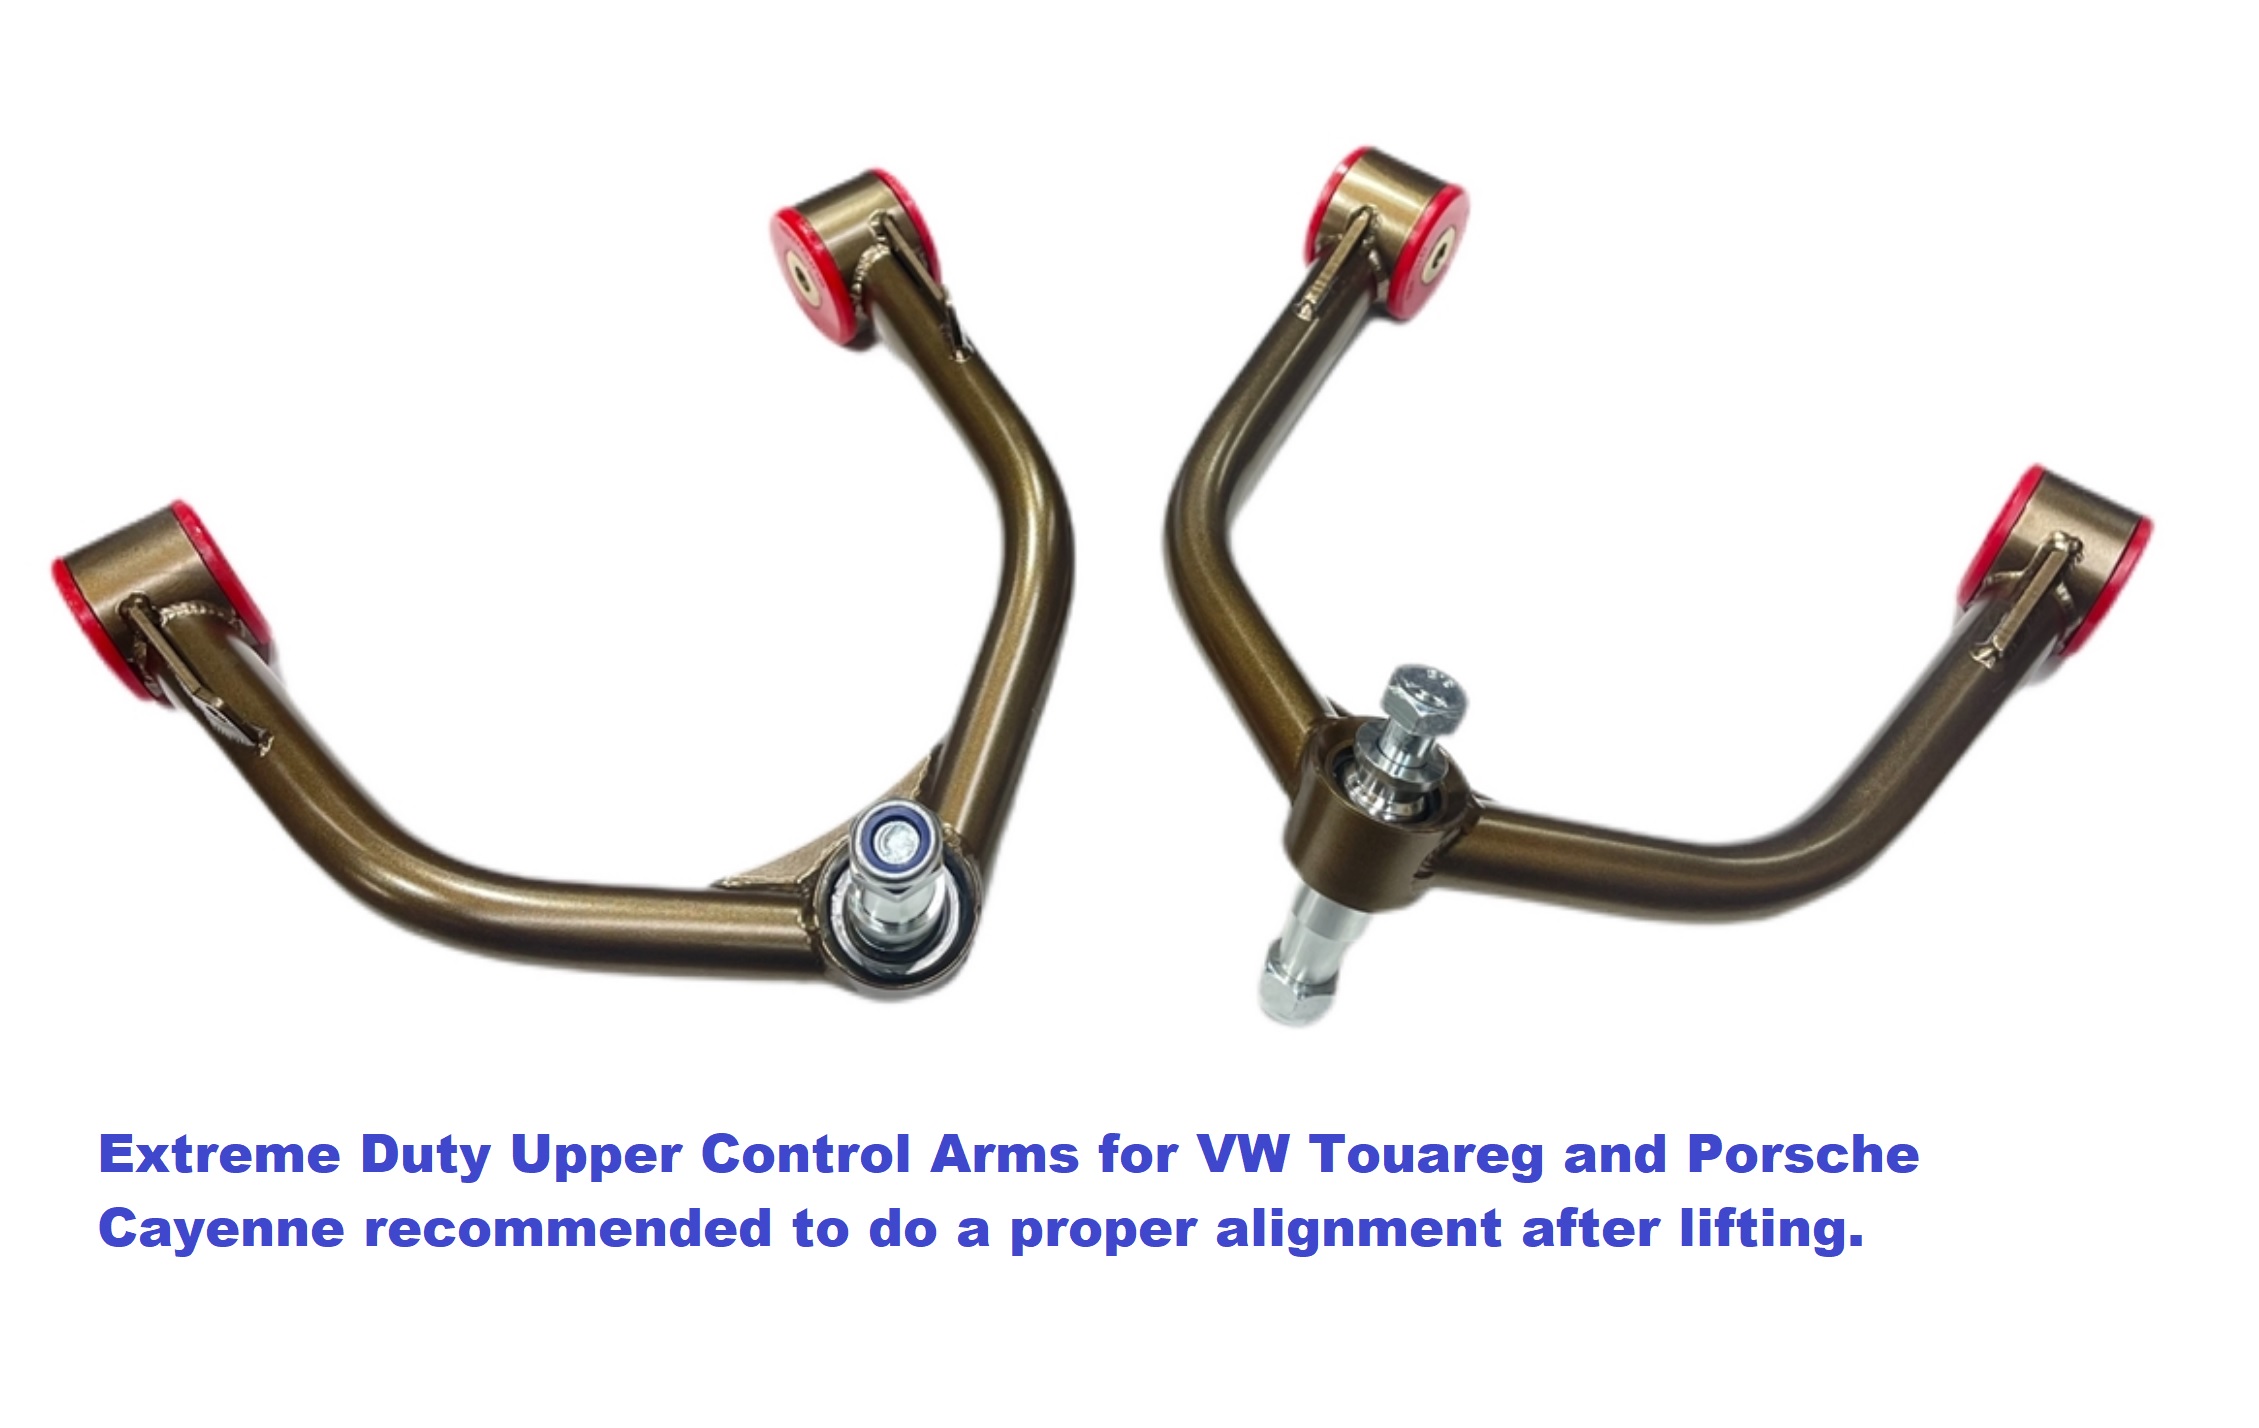 These Heavy Duty Upper Control Arms allow for proper alignment,